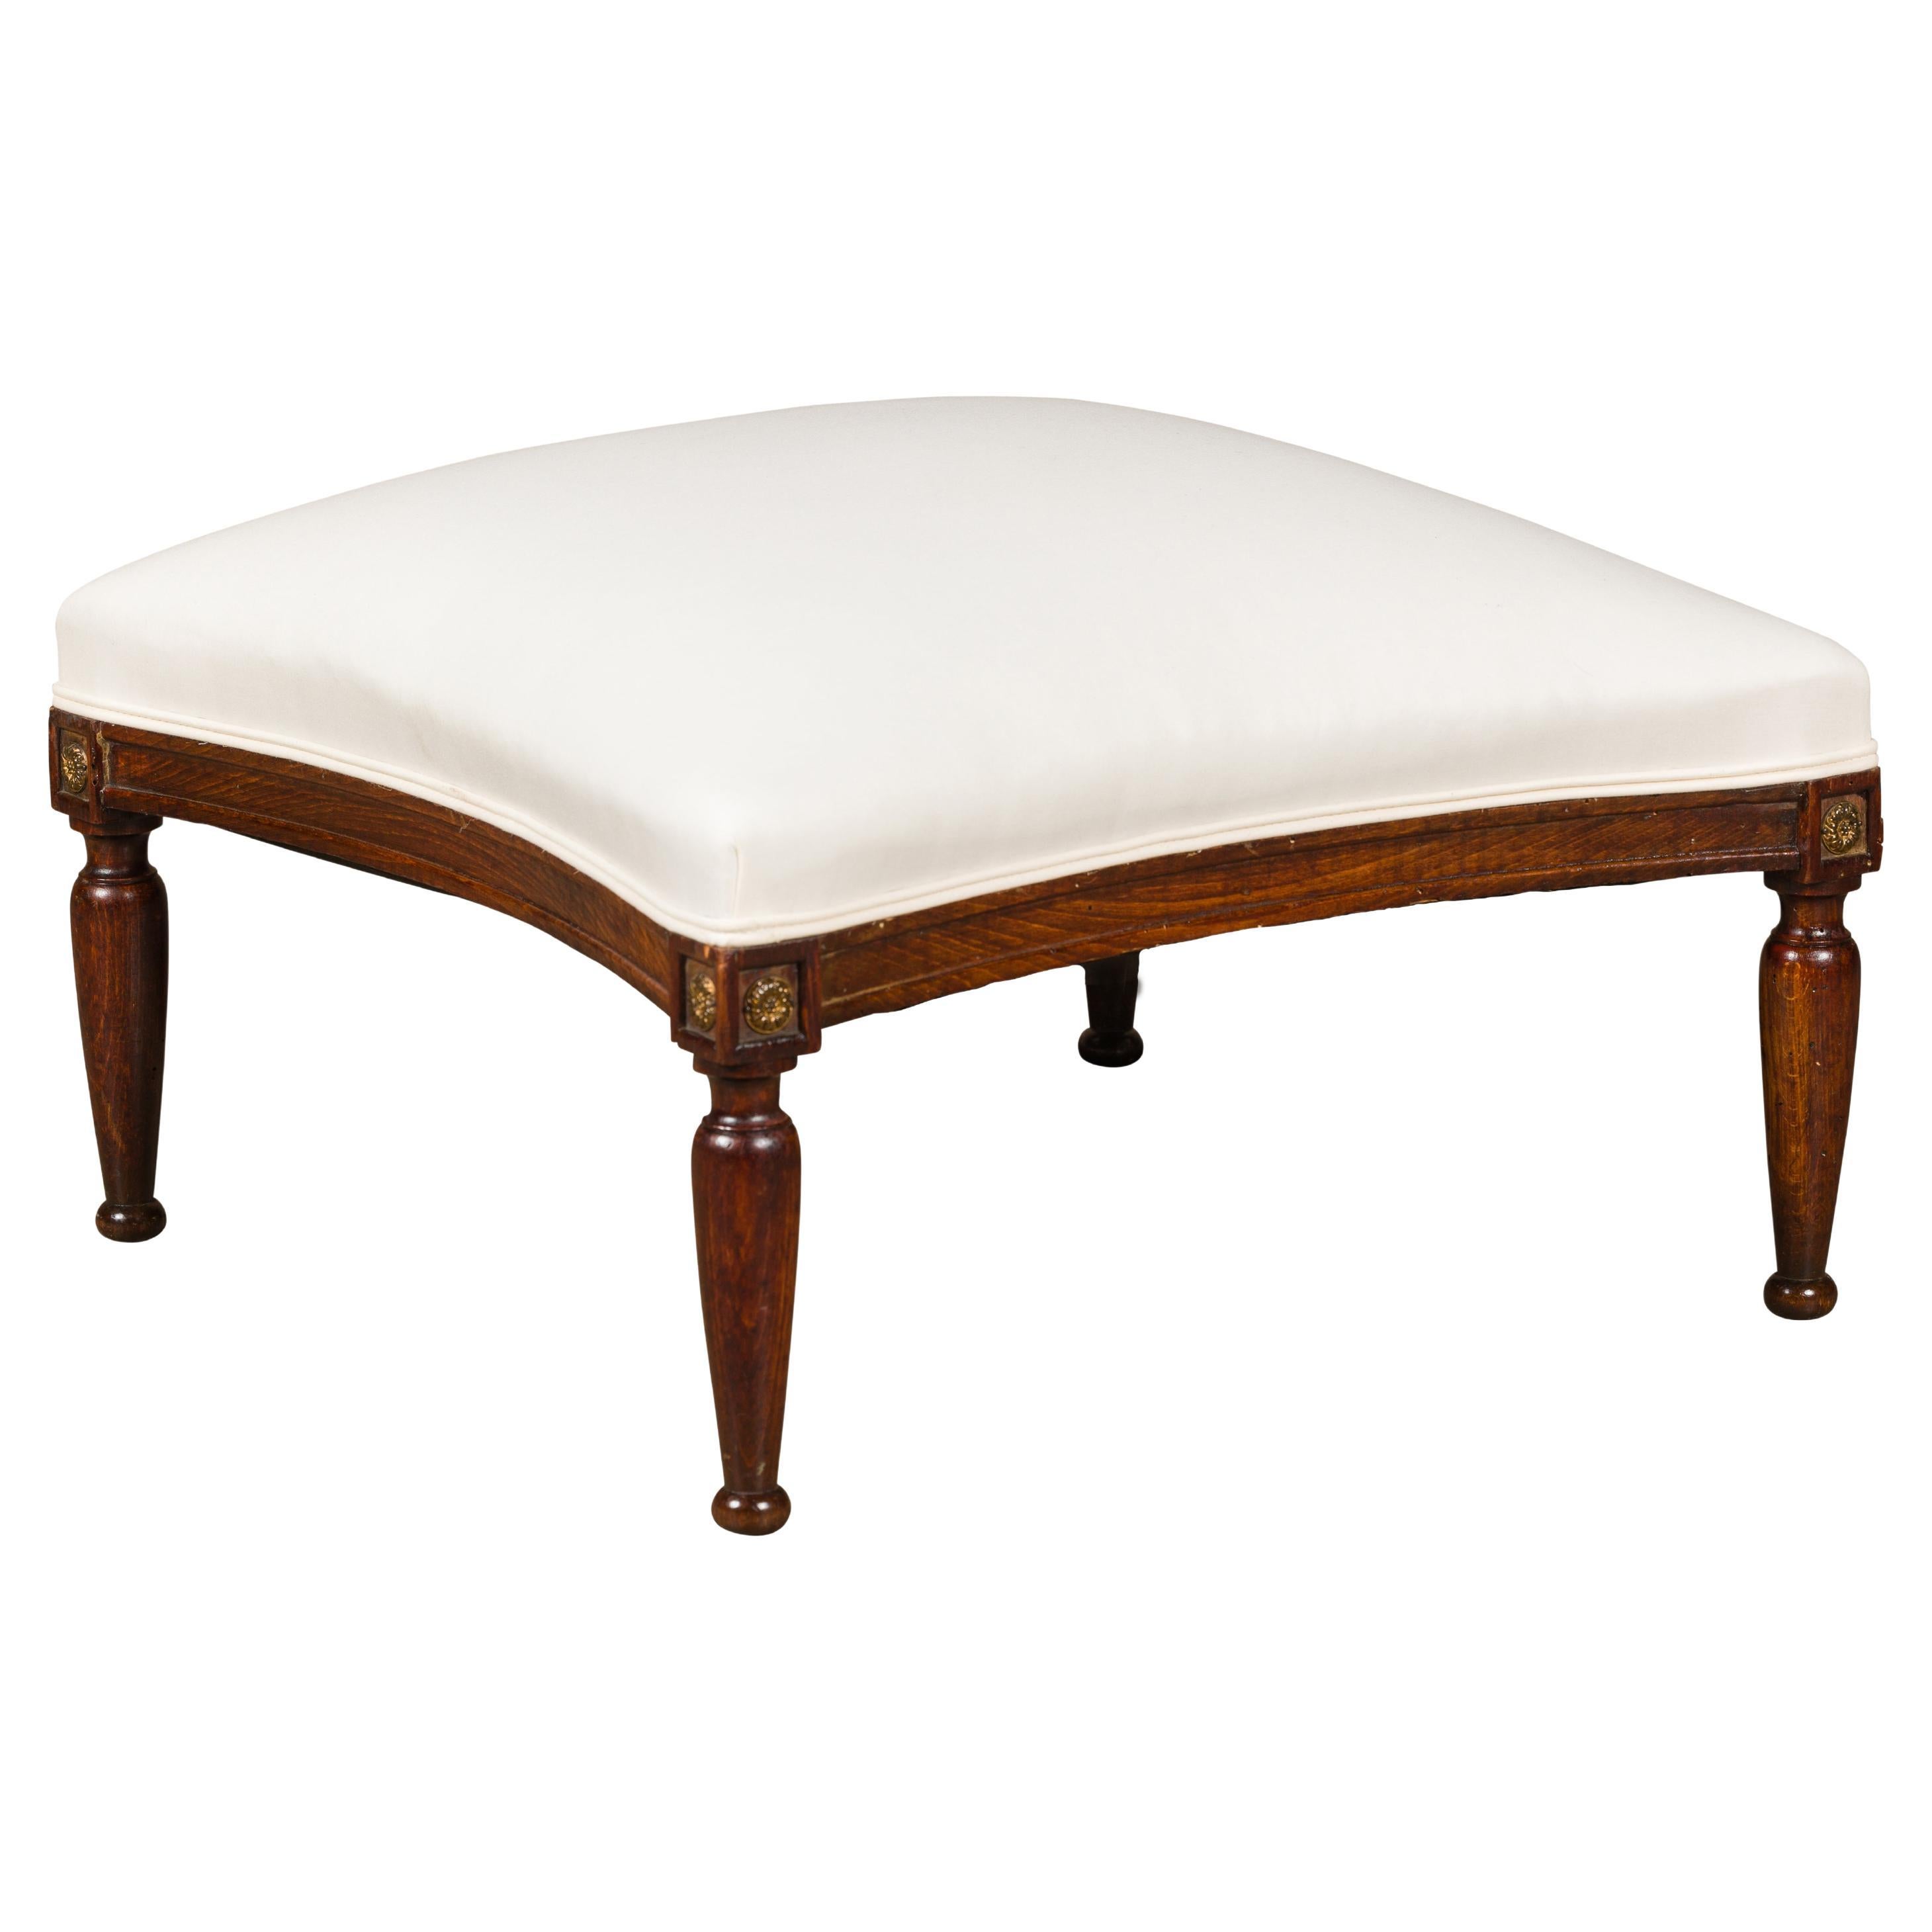 French Turn of the Century Ottoman with Giltwood Rosettes and Upholstery, 1900s